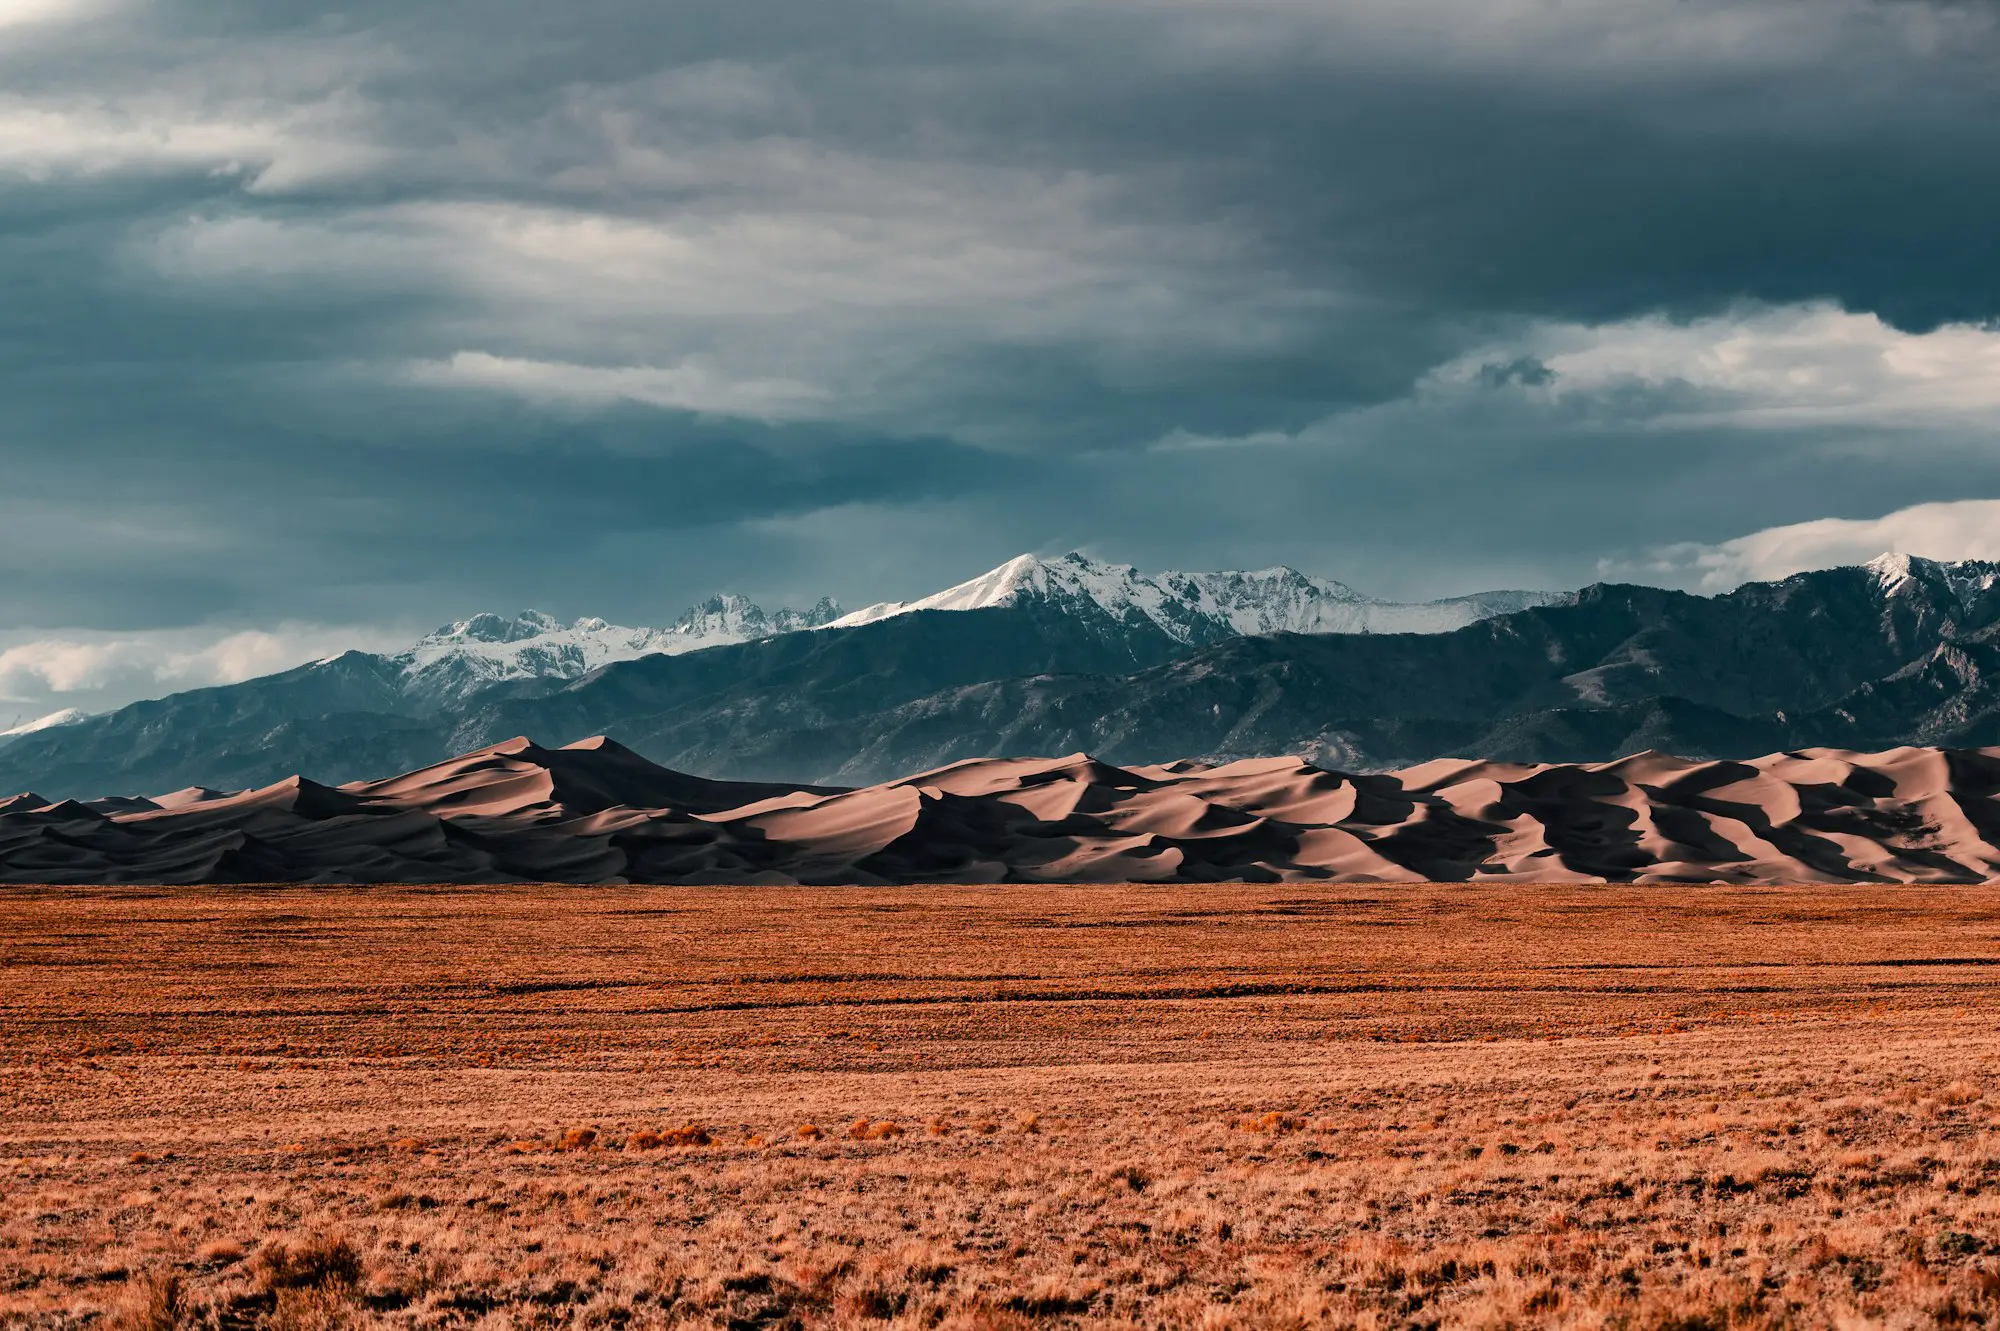 Road trip to Great Sand Dunes National Park